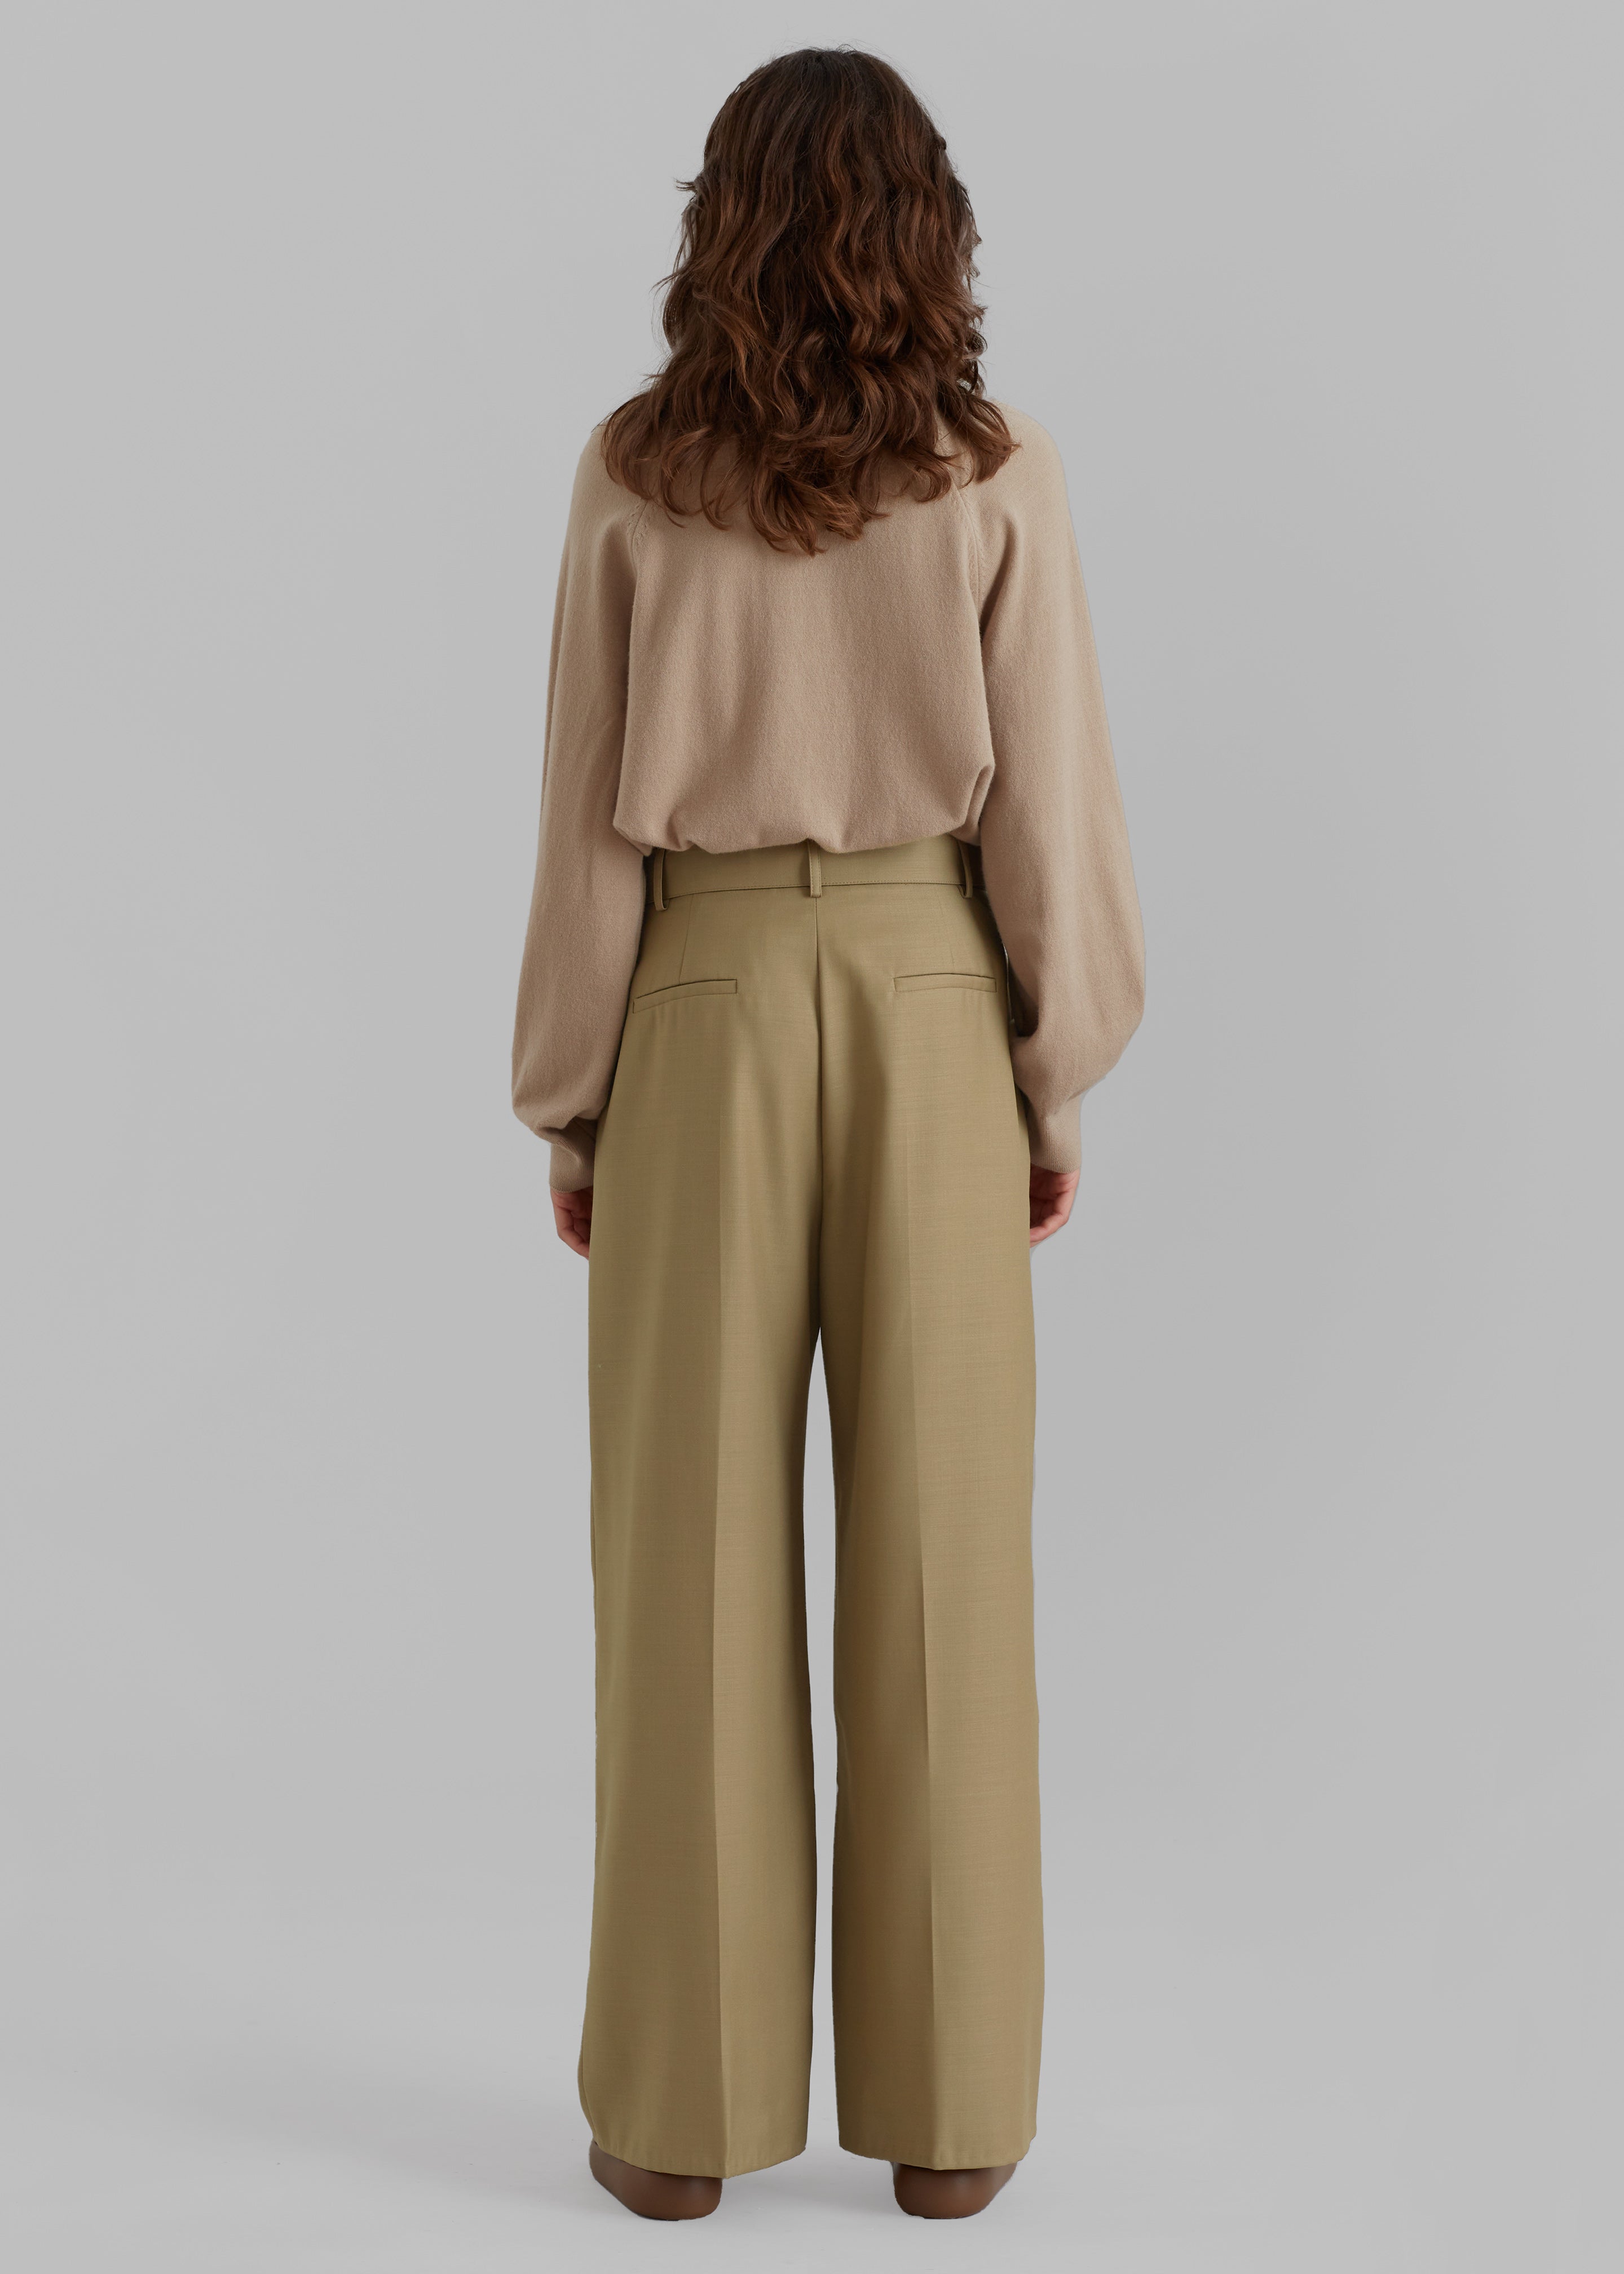 Lyxe Belted Pants - Taupe - 6